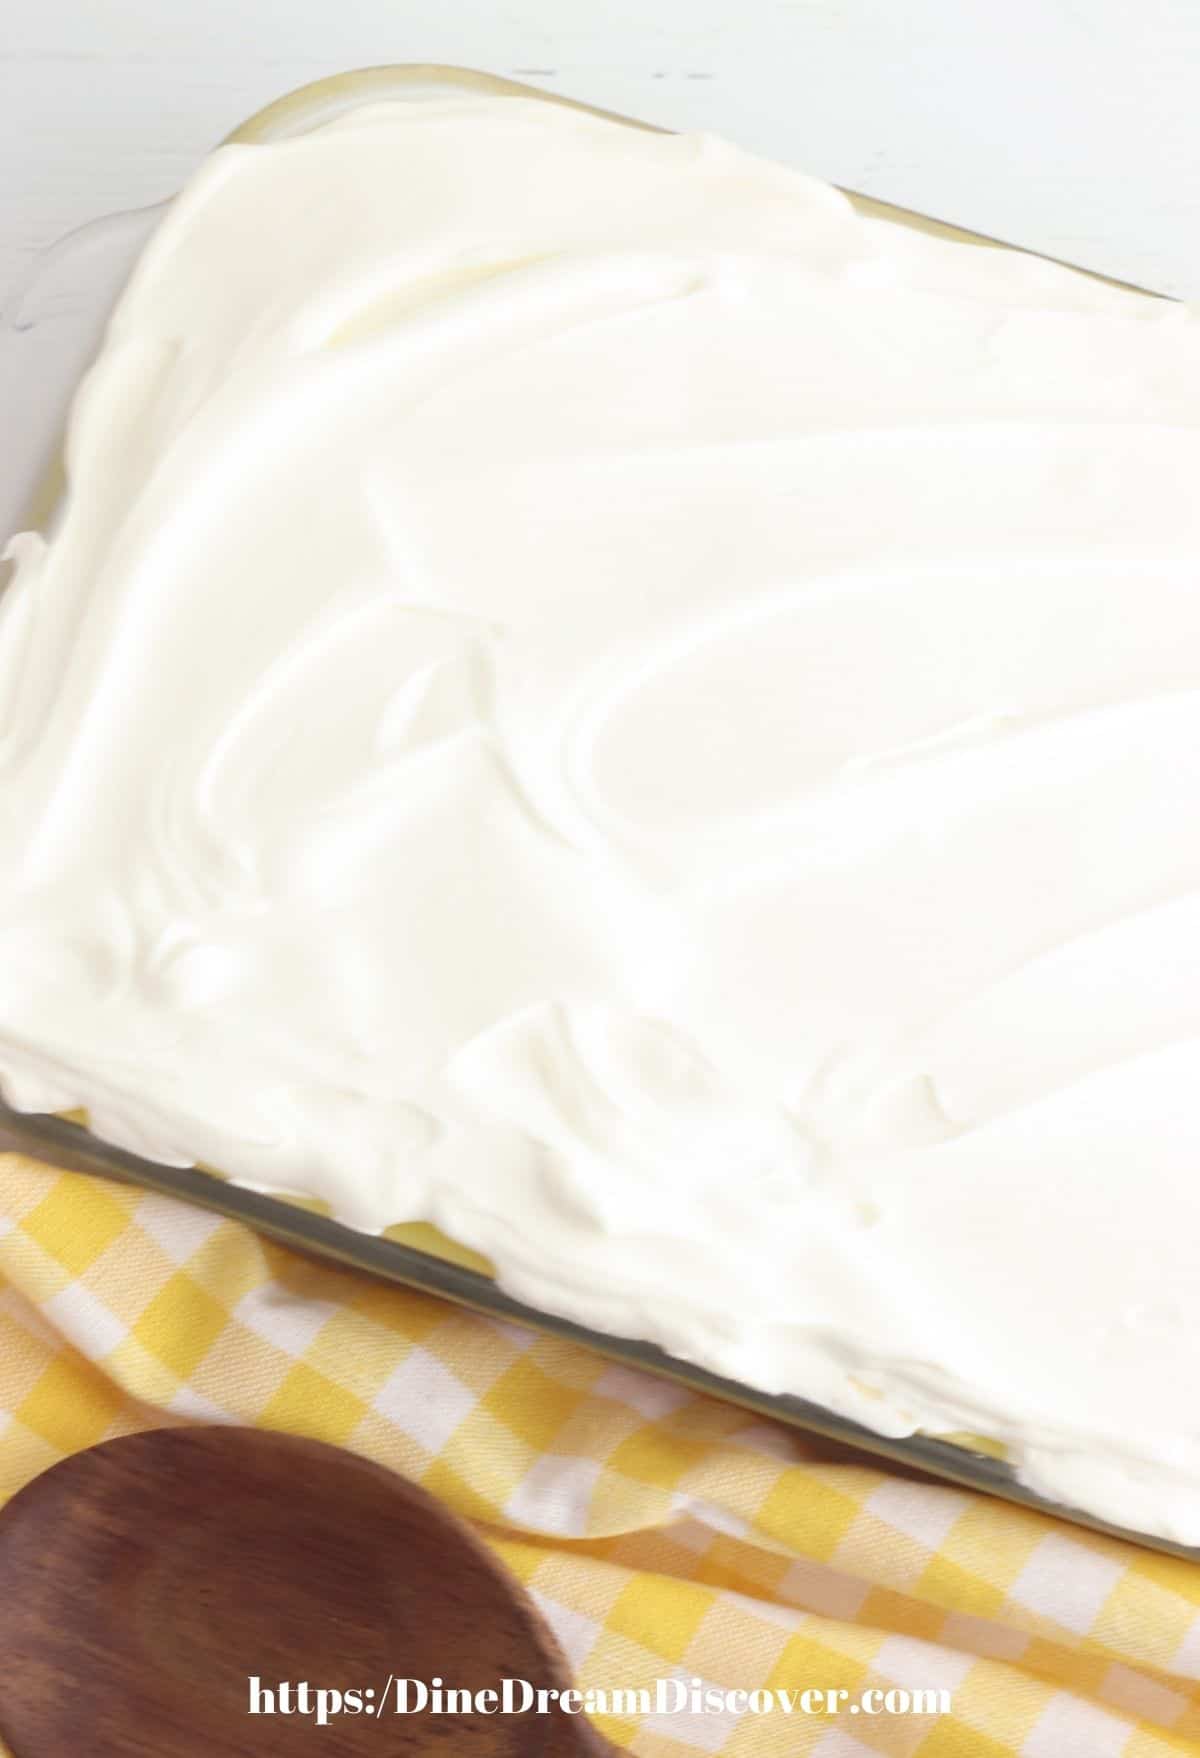 WHIPPED TOPPING CAKE